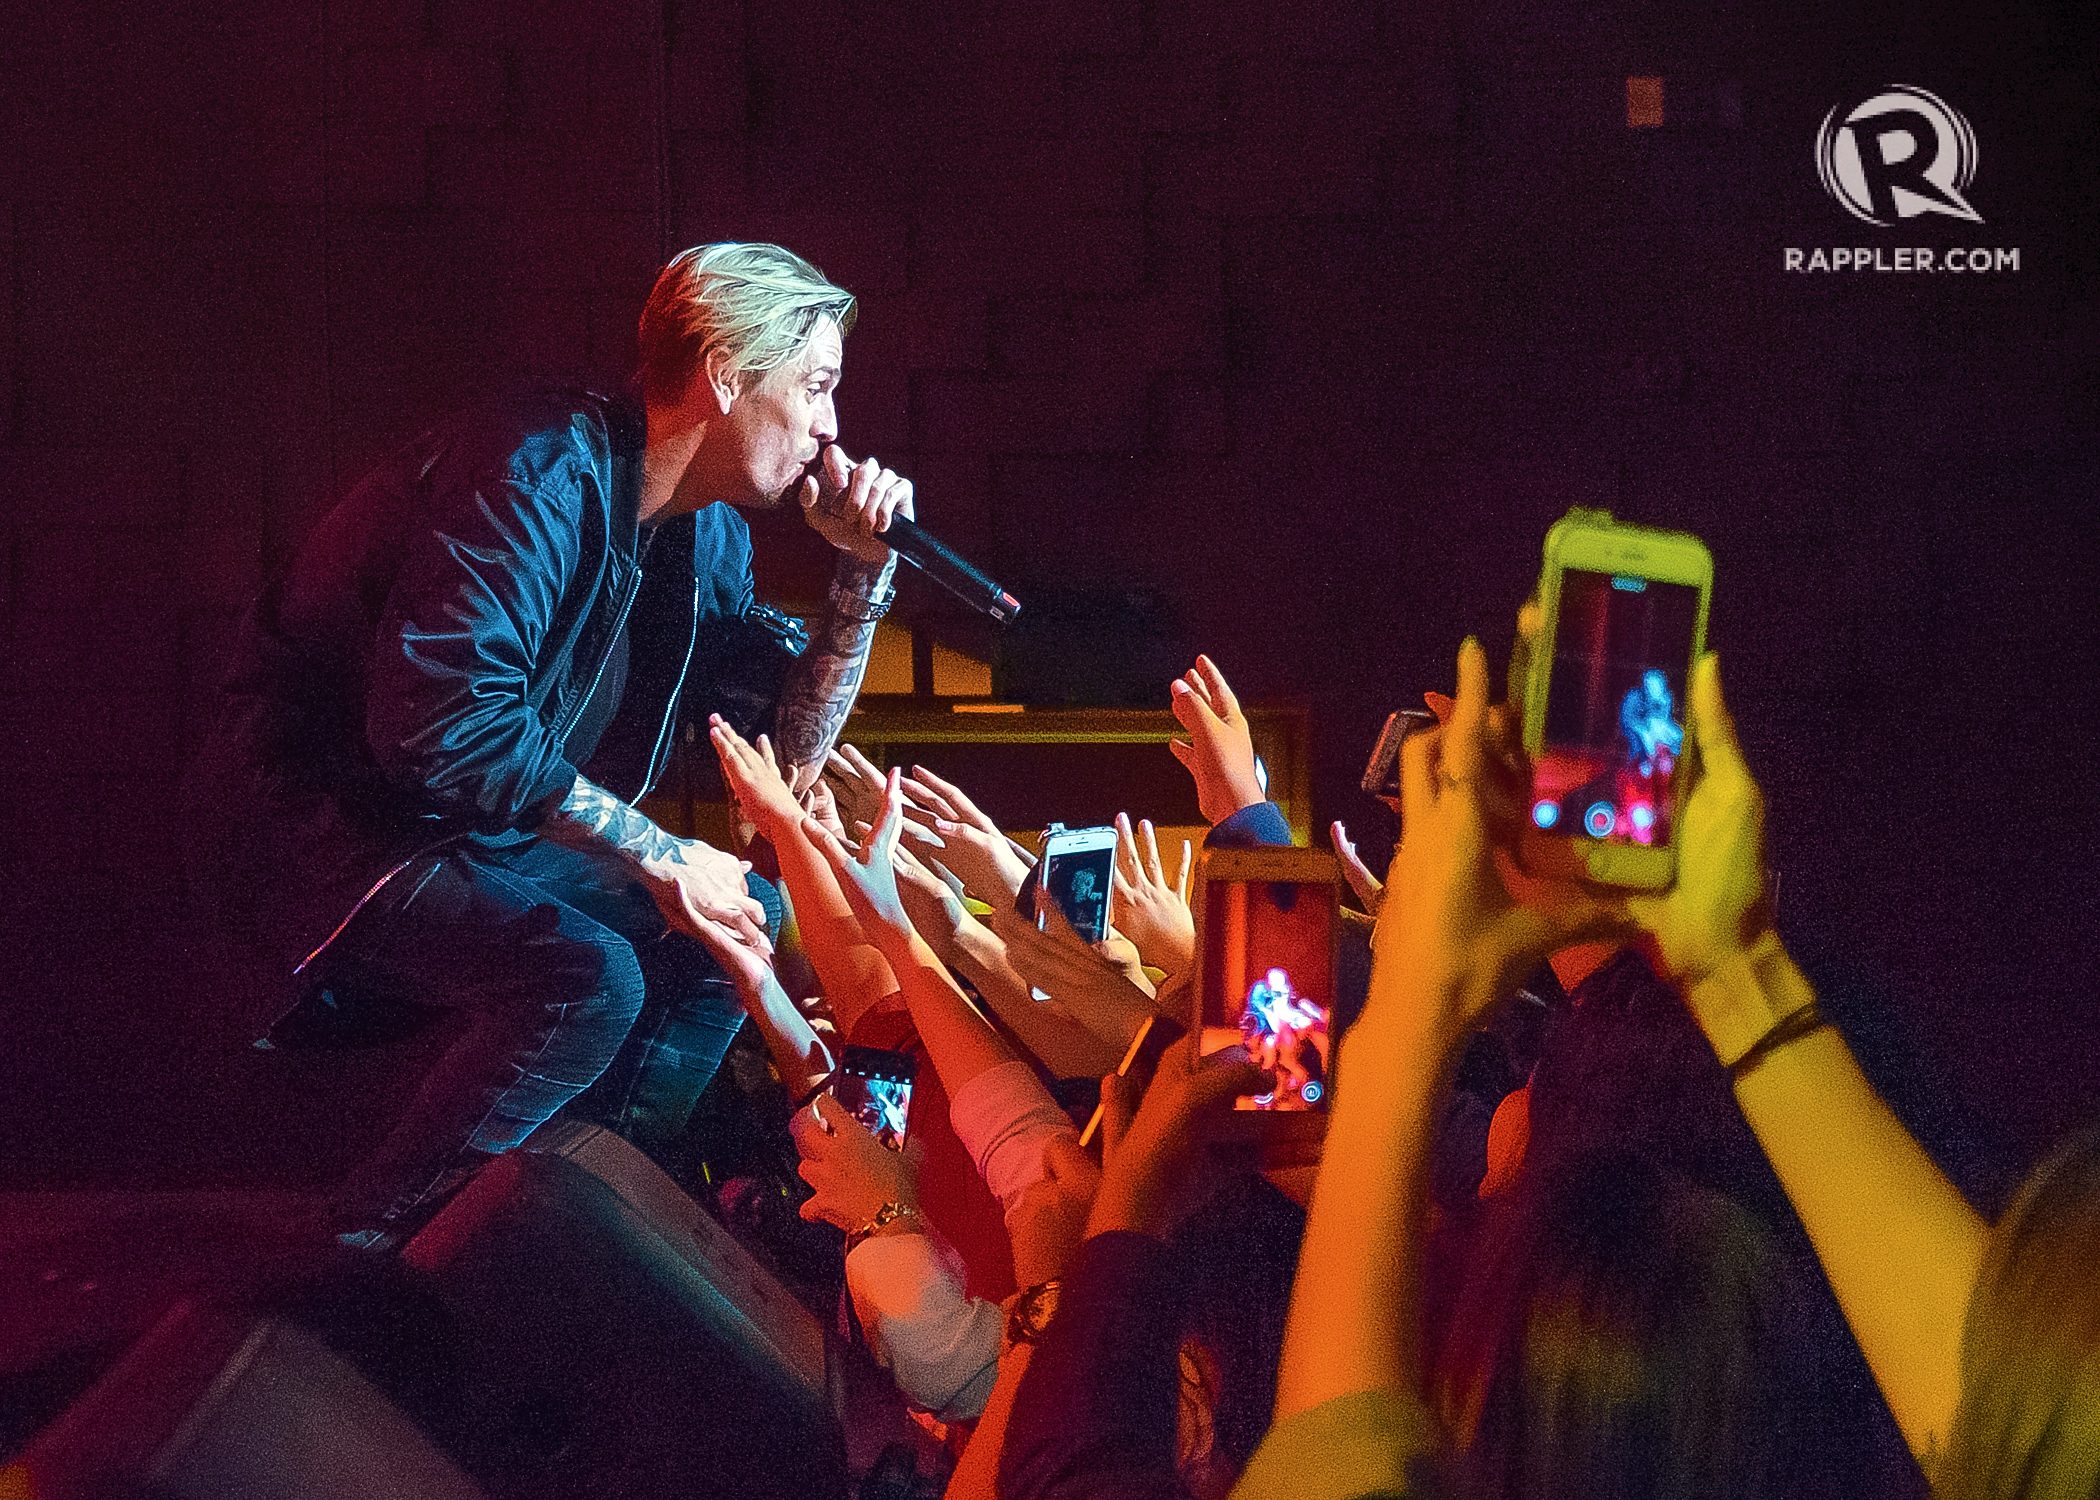 UP CLOSE. Aaron Carter gets near his fans as they take photos and videos 